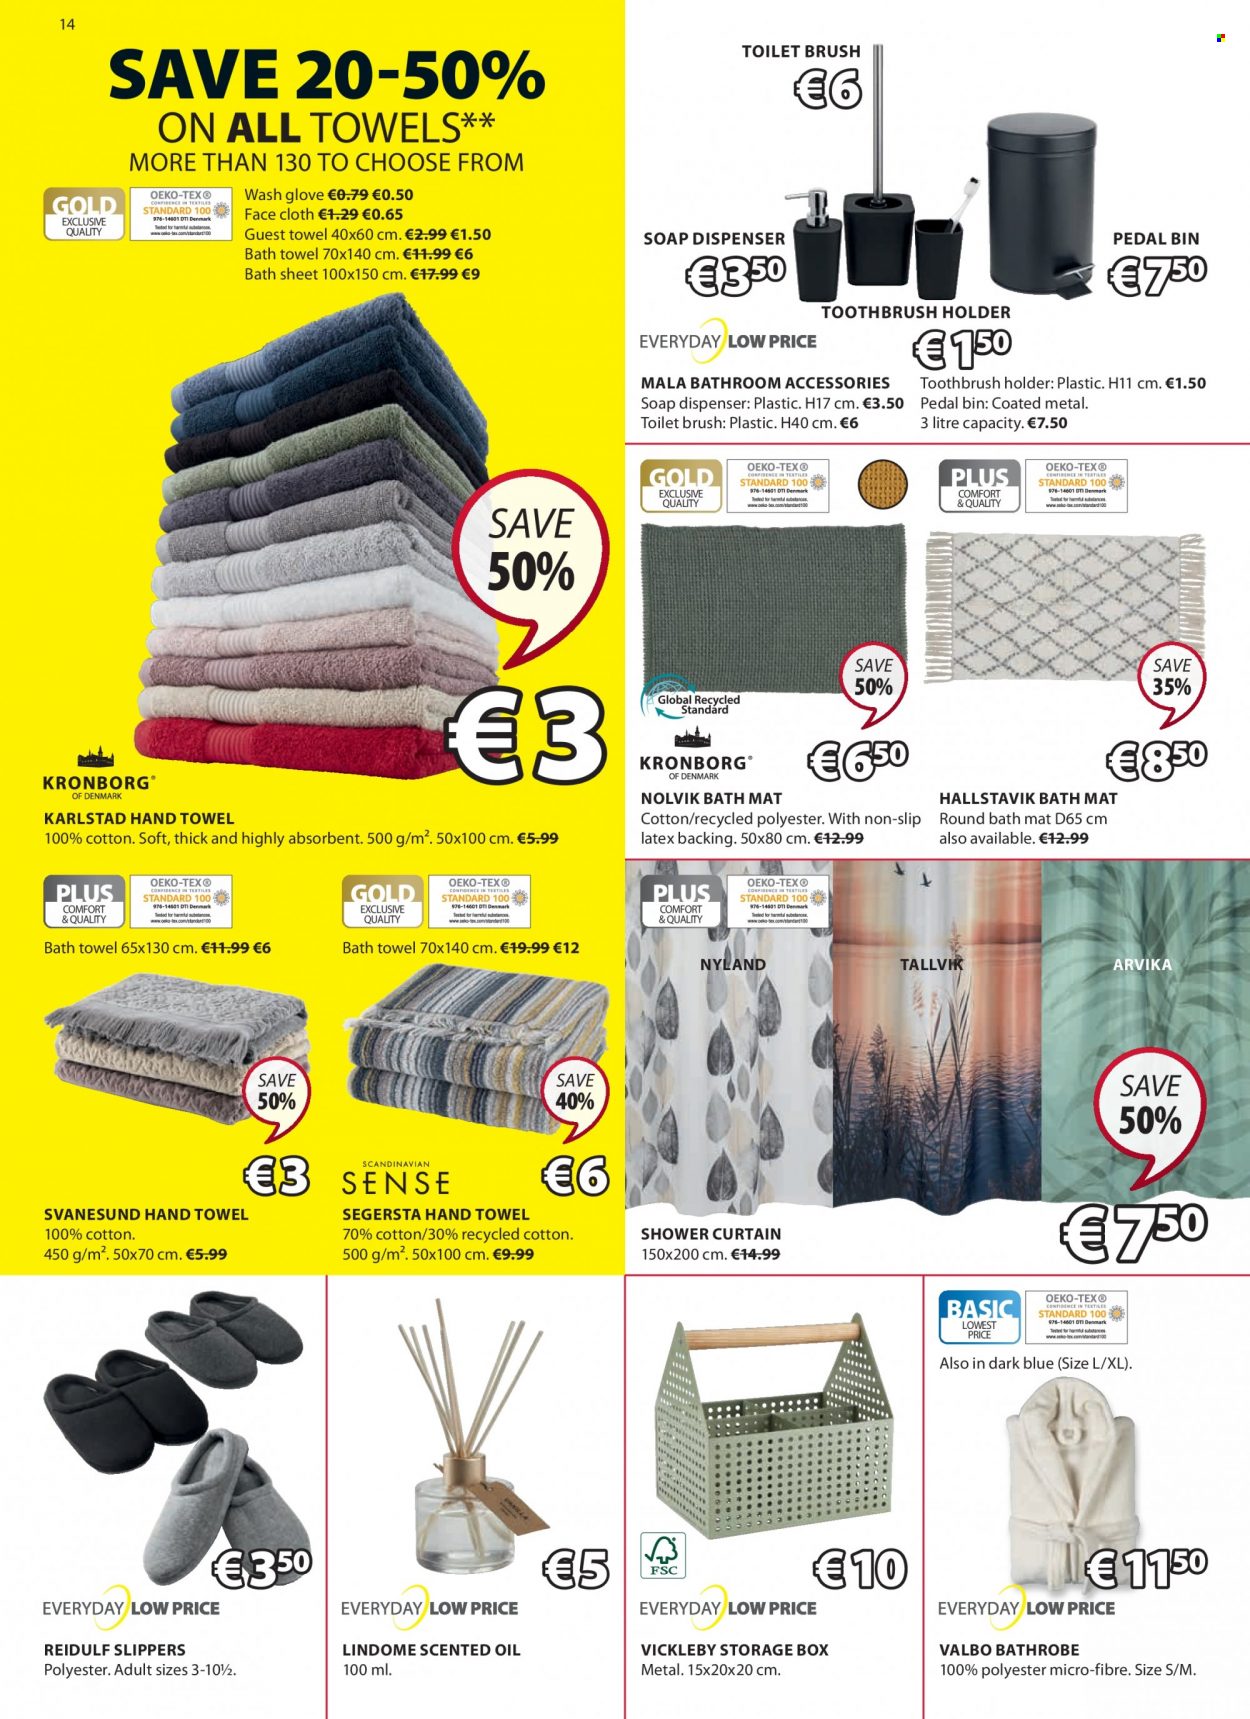 thumbnail - JYSK offer  - 30.12.2021 - 12.01.2022 - Sales products - storage box, bin, holder, gloves, shower curtain, soap dispenser, toilet brush, toothbrush holder, dispenser, scented oil, curtain, bath mat, bath towel, towel, hand towel, facecloth. Page 14.